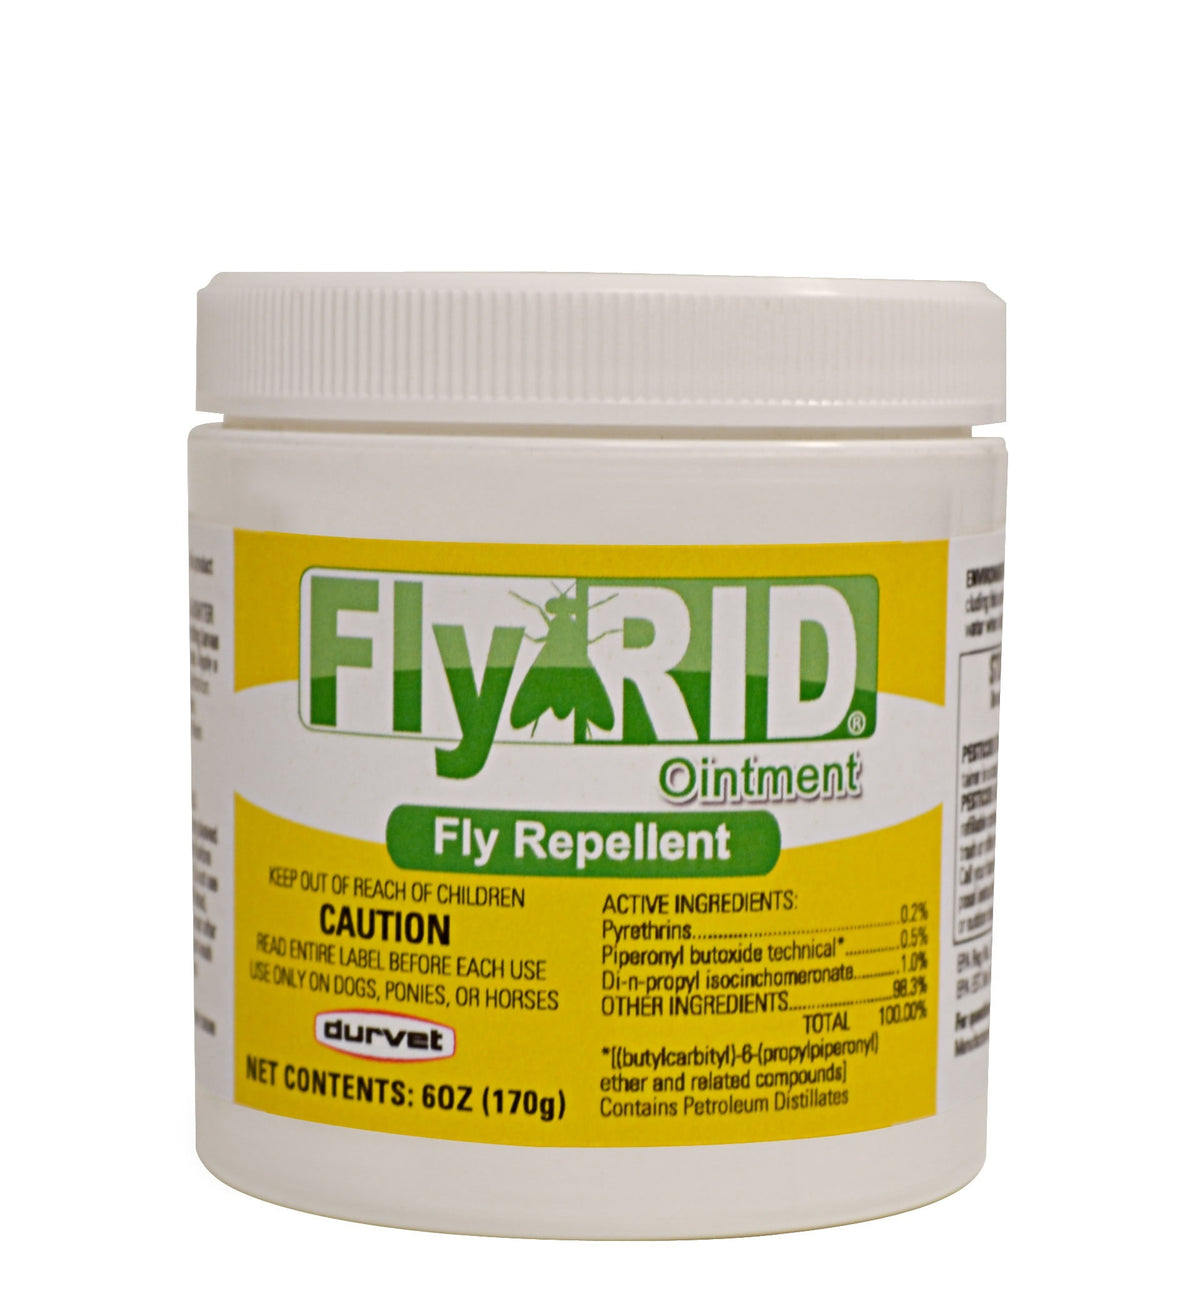 Durvet Fly Rid Insecticide Ointment Fly Repellent 6oz For Dogs and Horses